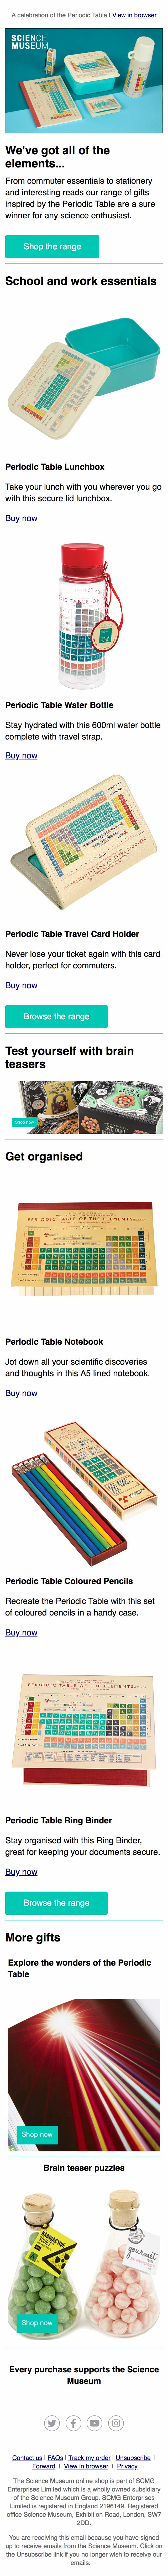 The Periodic Table is taking over - mobile view